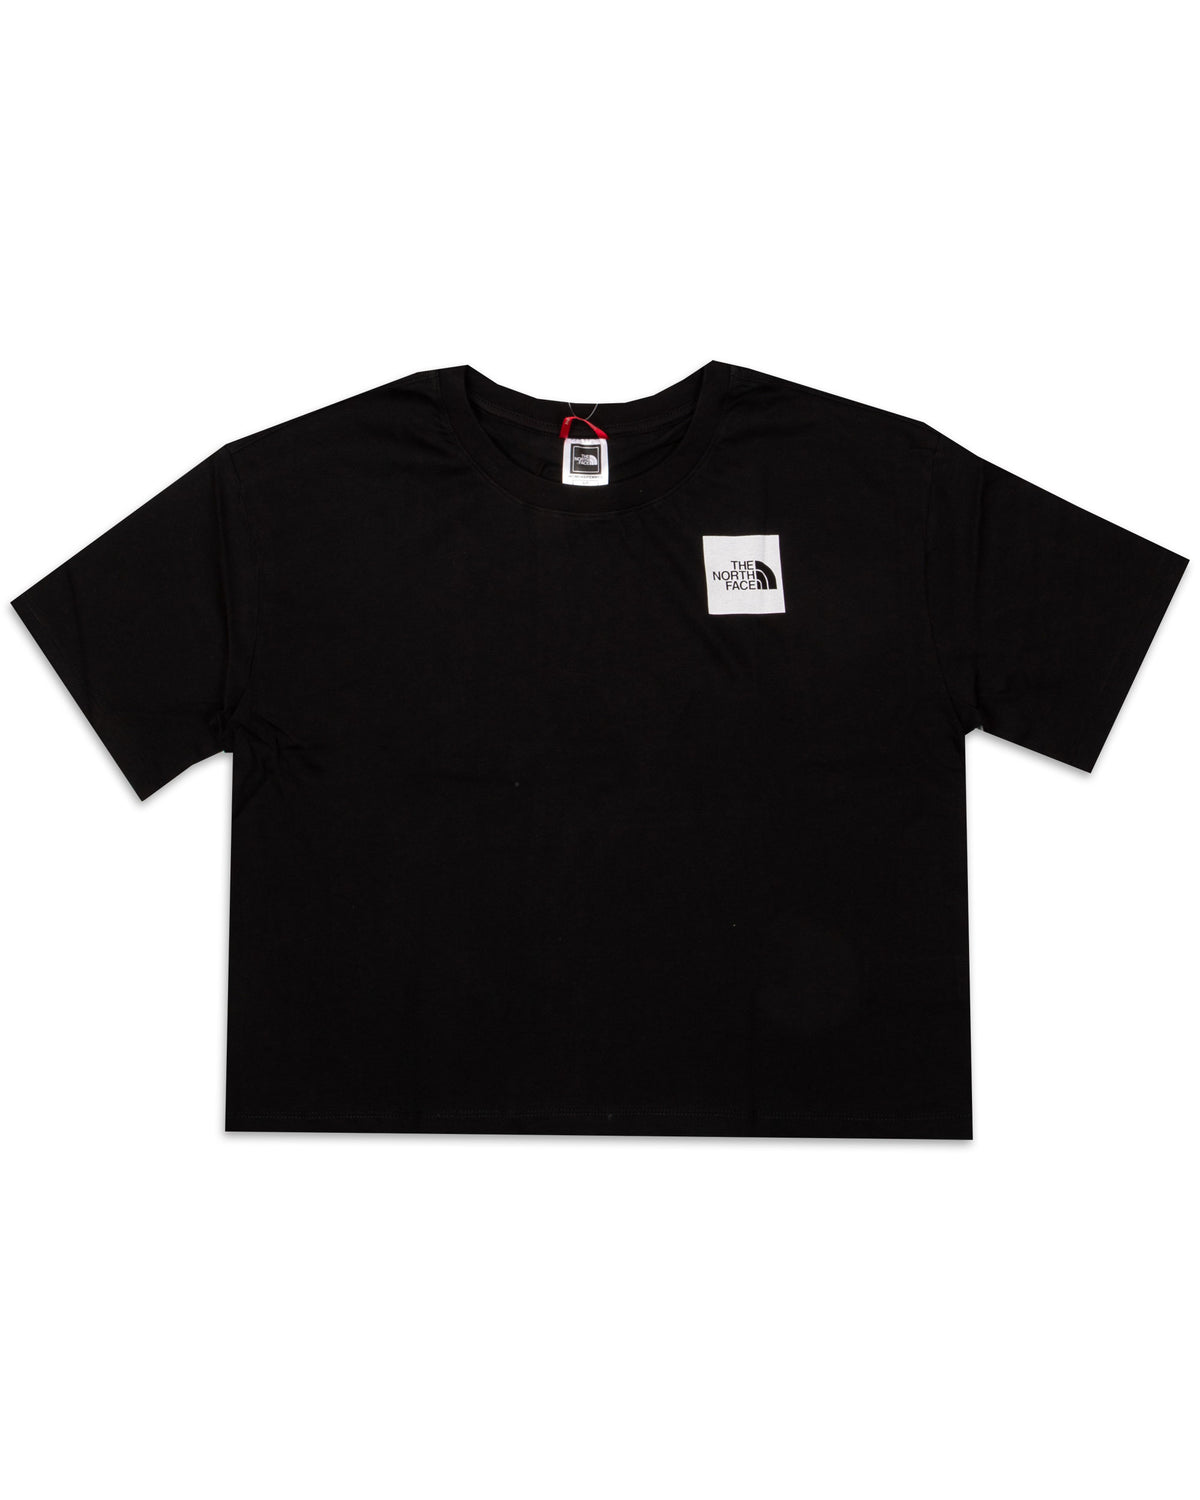 T-Shirt Crop Donna The North Face Nero